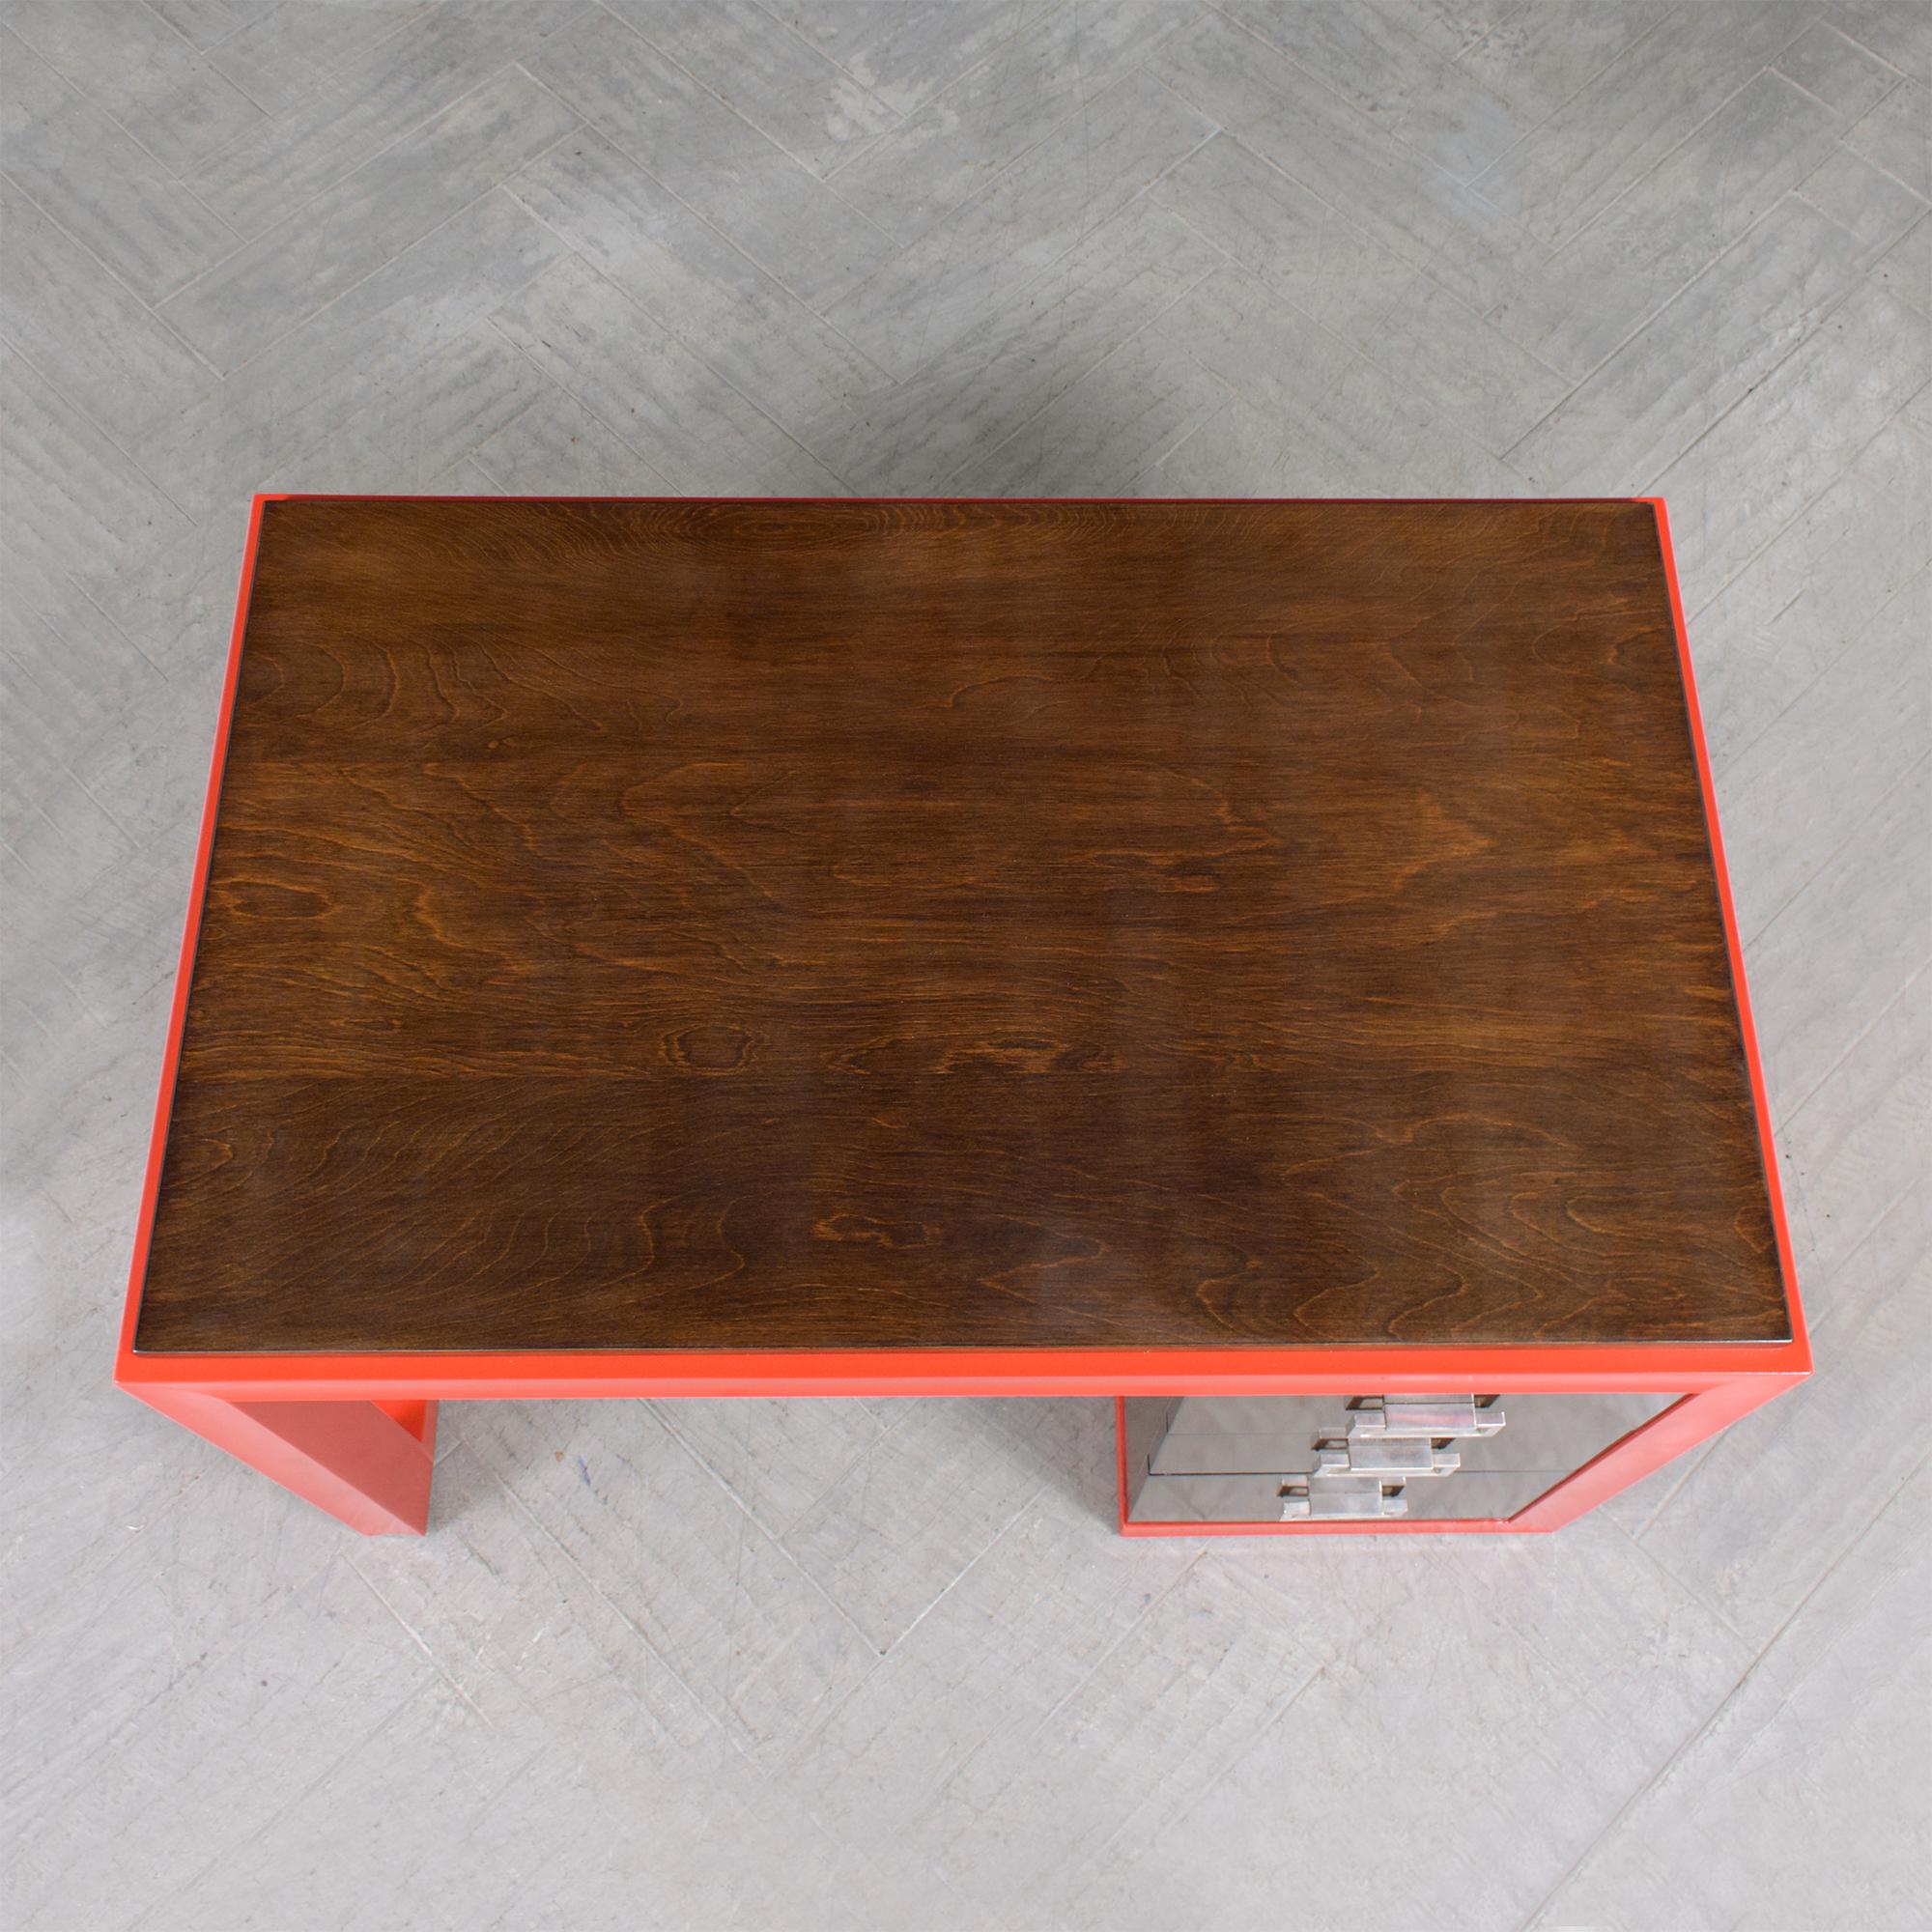 American 1960s Mid-Century Modern Walnut Desk with Vibrant Red Lacquer Finish For Sale